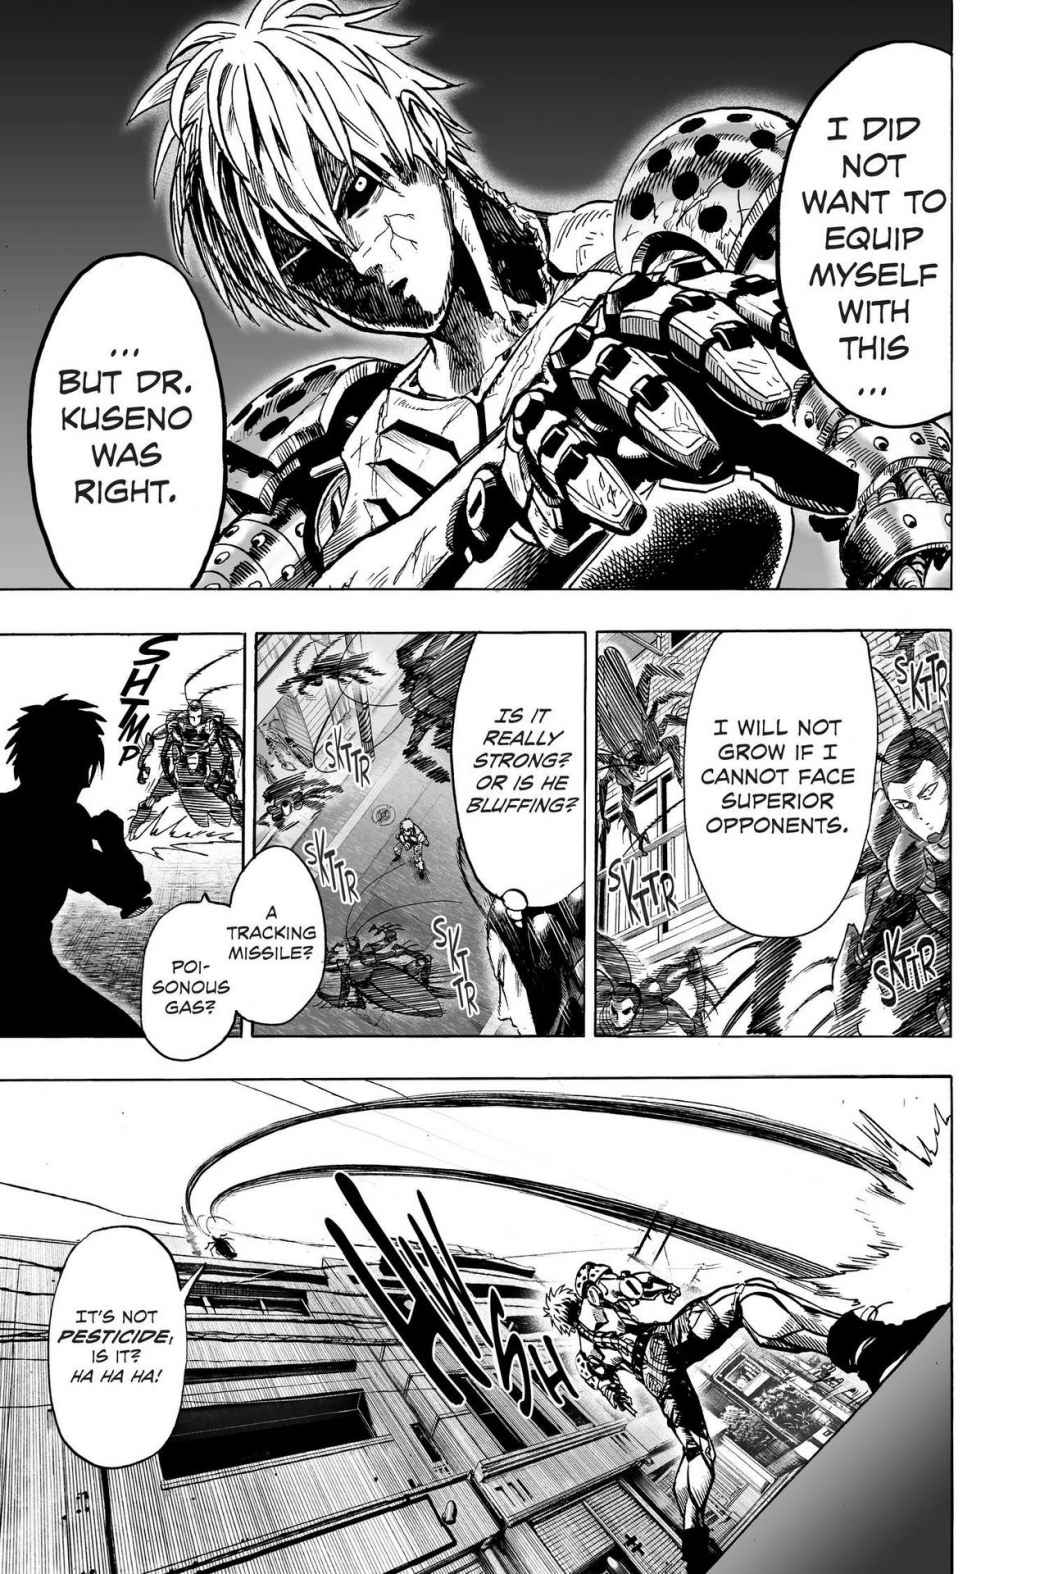 One-Punch Man, Punch 64 image 20